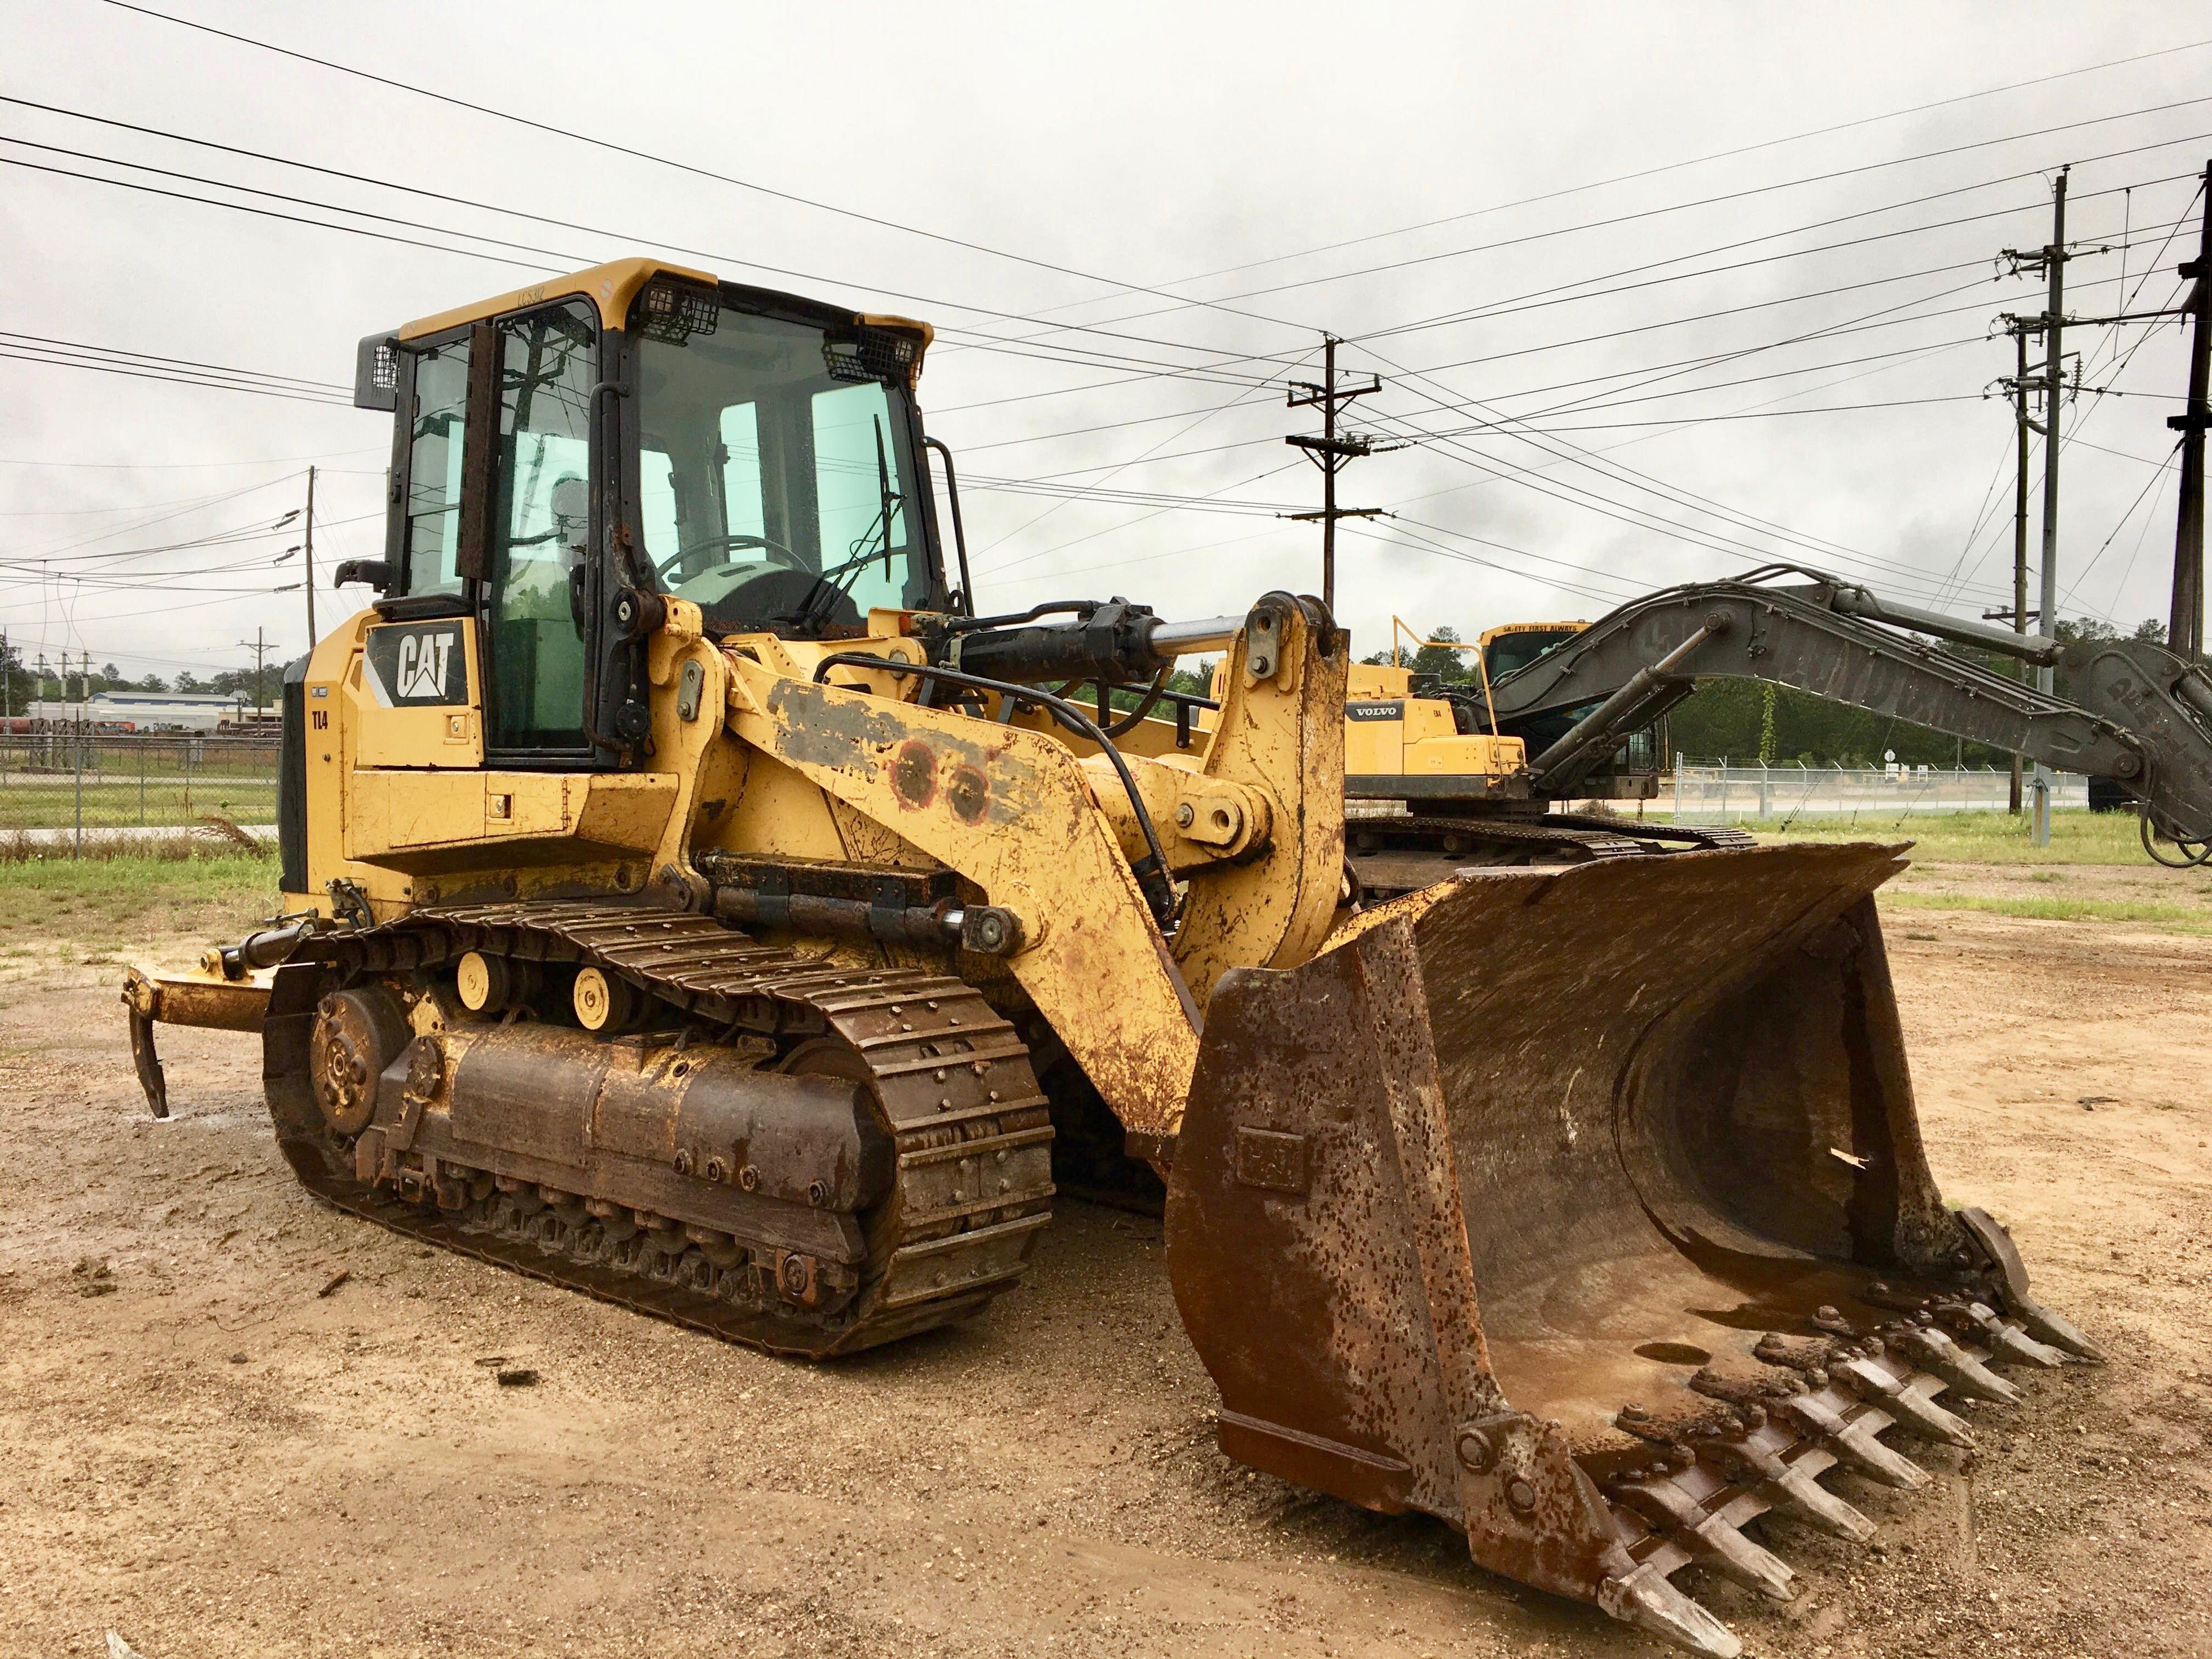 2008 Caterpillar Model 963D Track Loader | Video Available